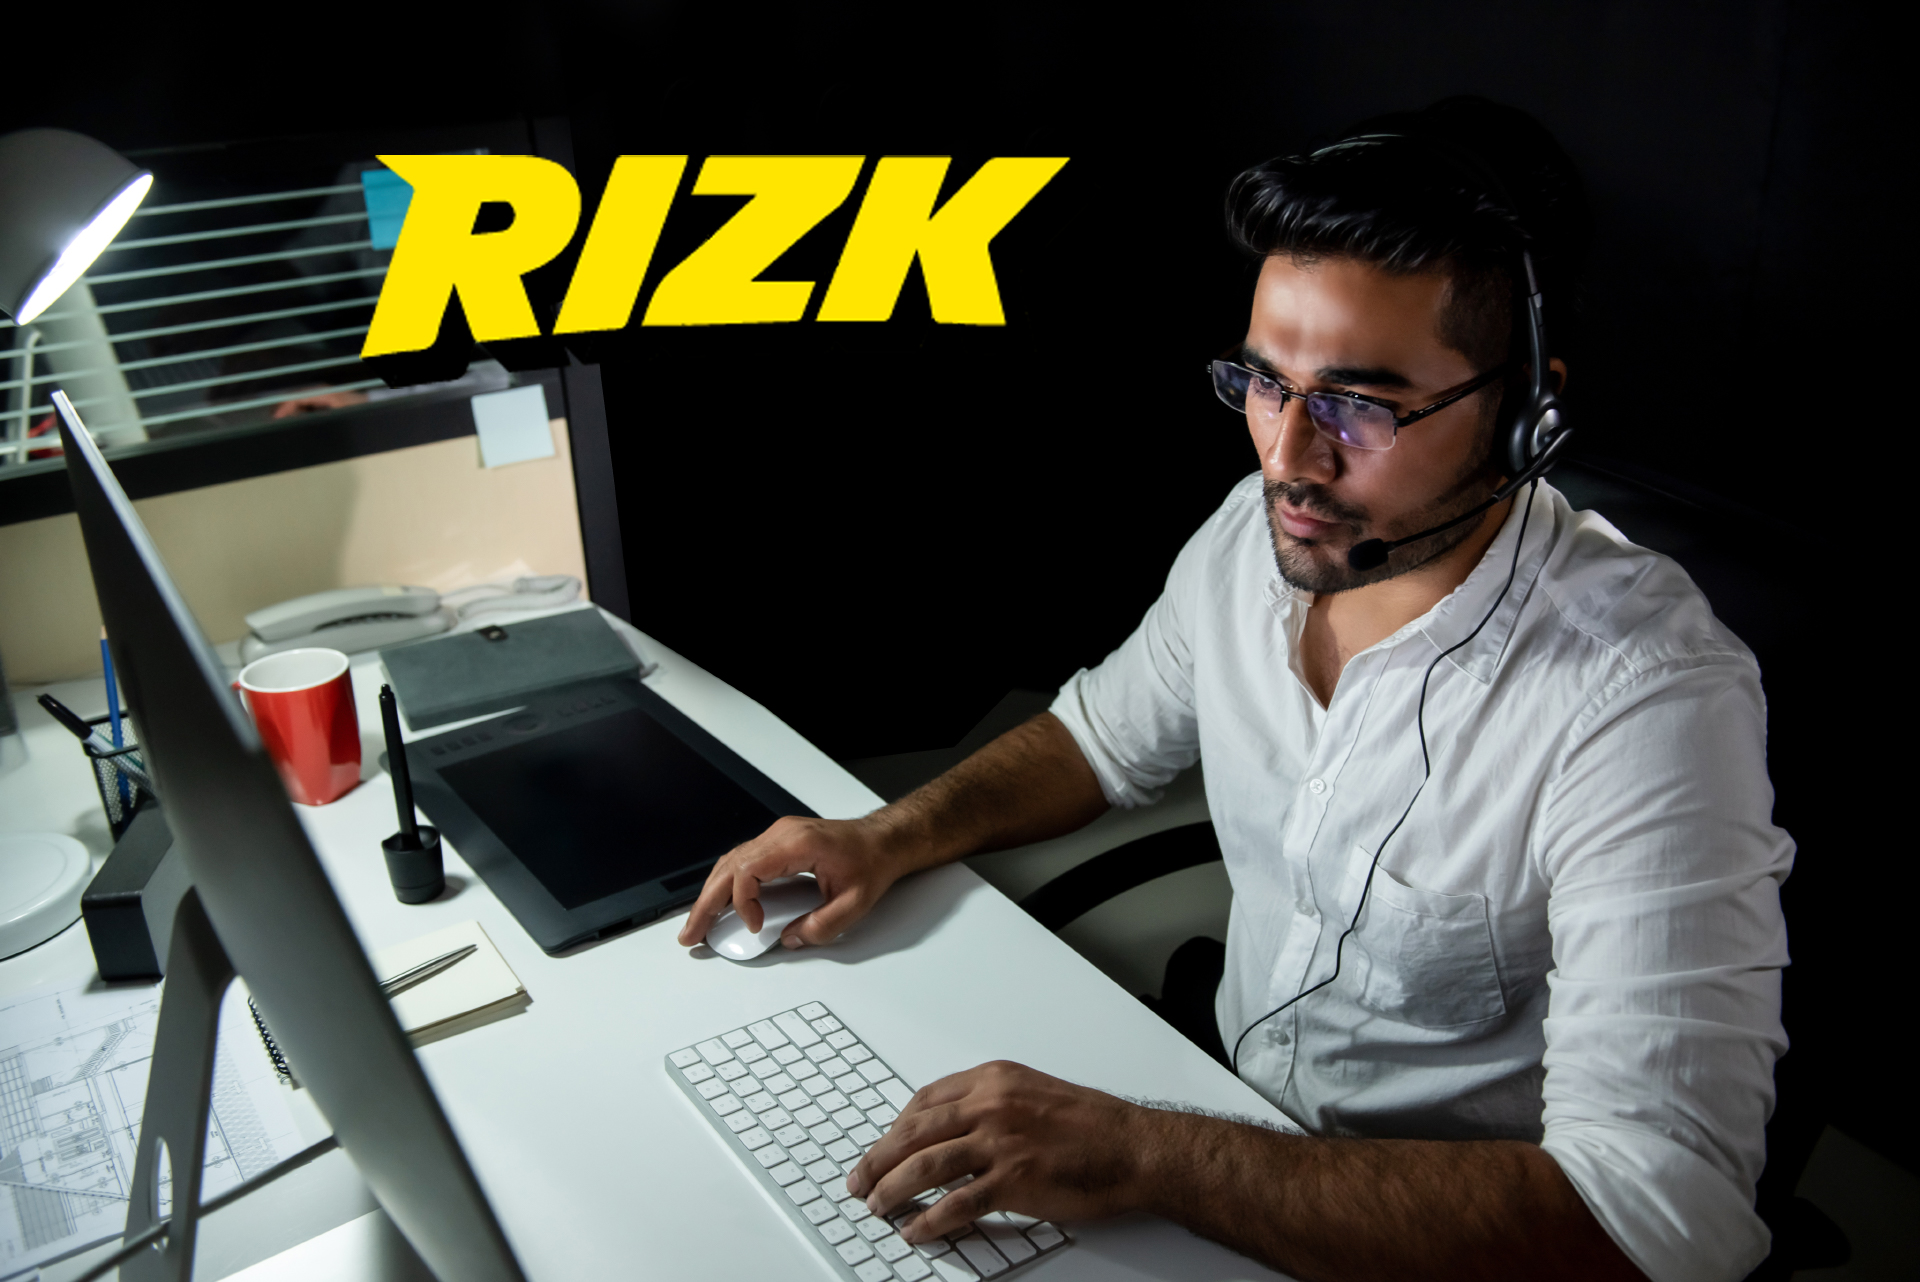 Rizk Customer Support works 24*7.